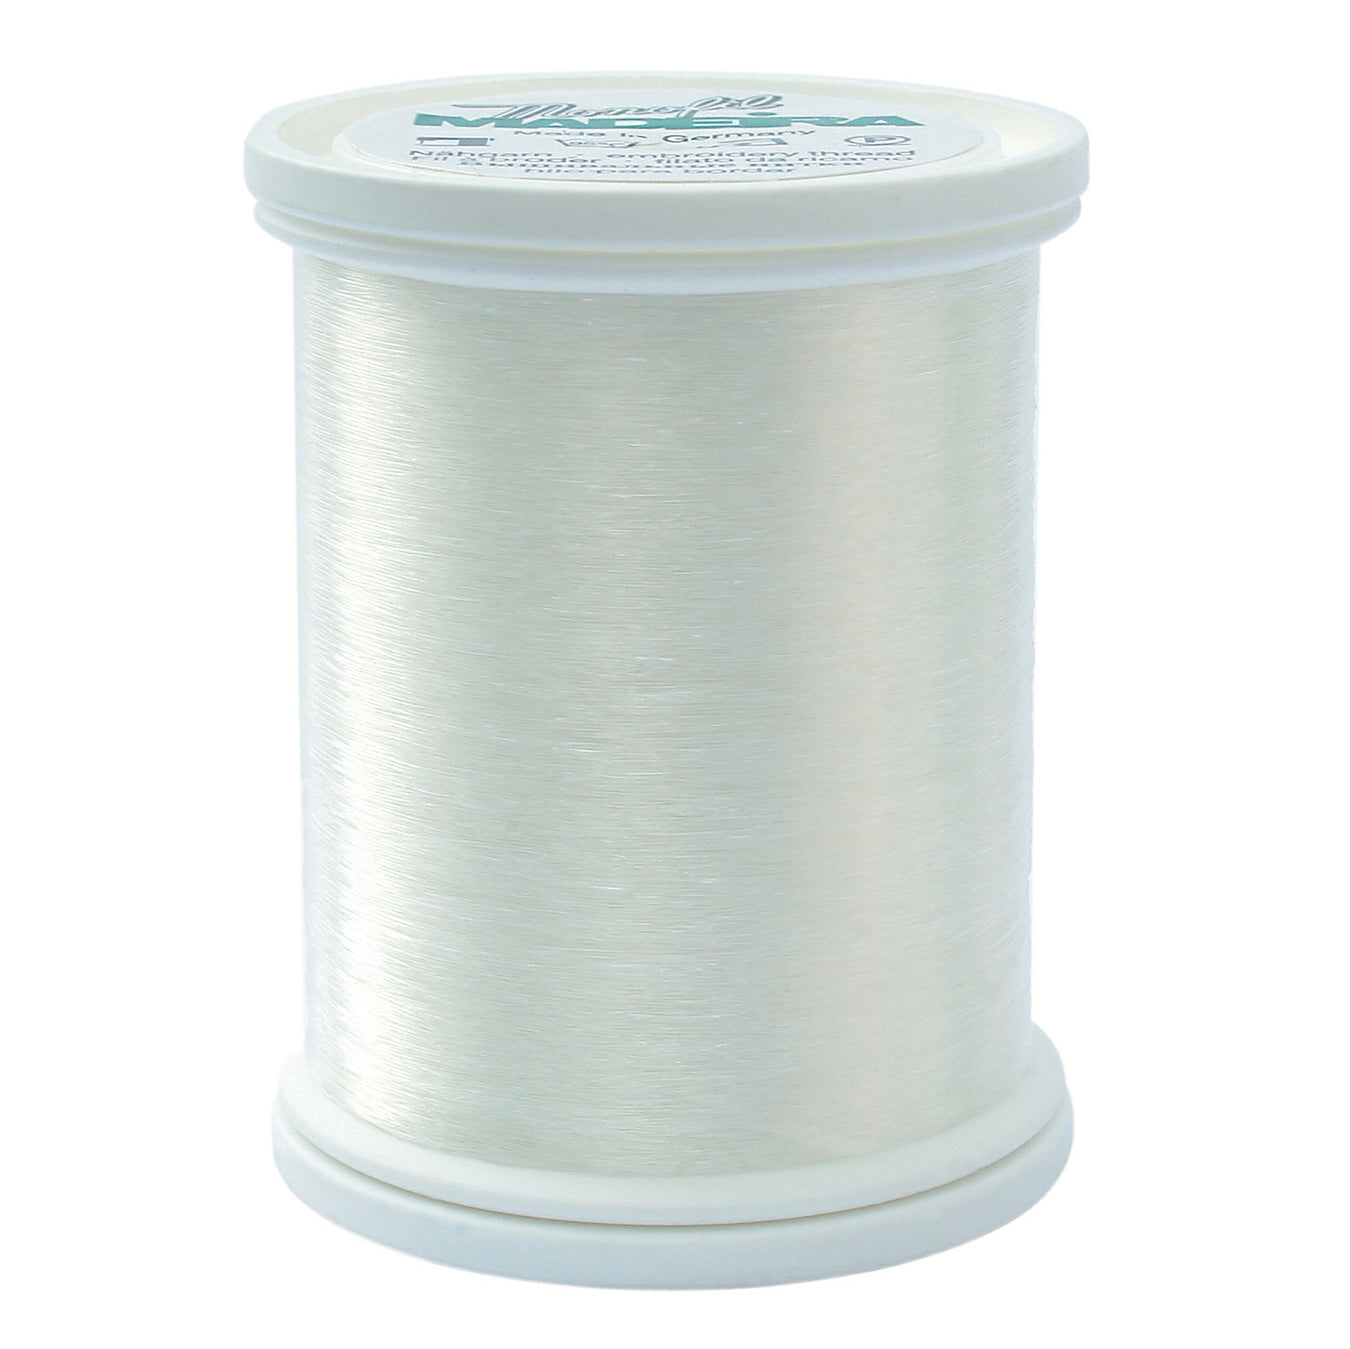 Shop Transparent sewing threads at Jaycotts